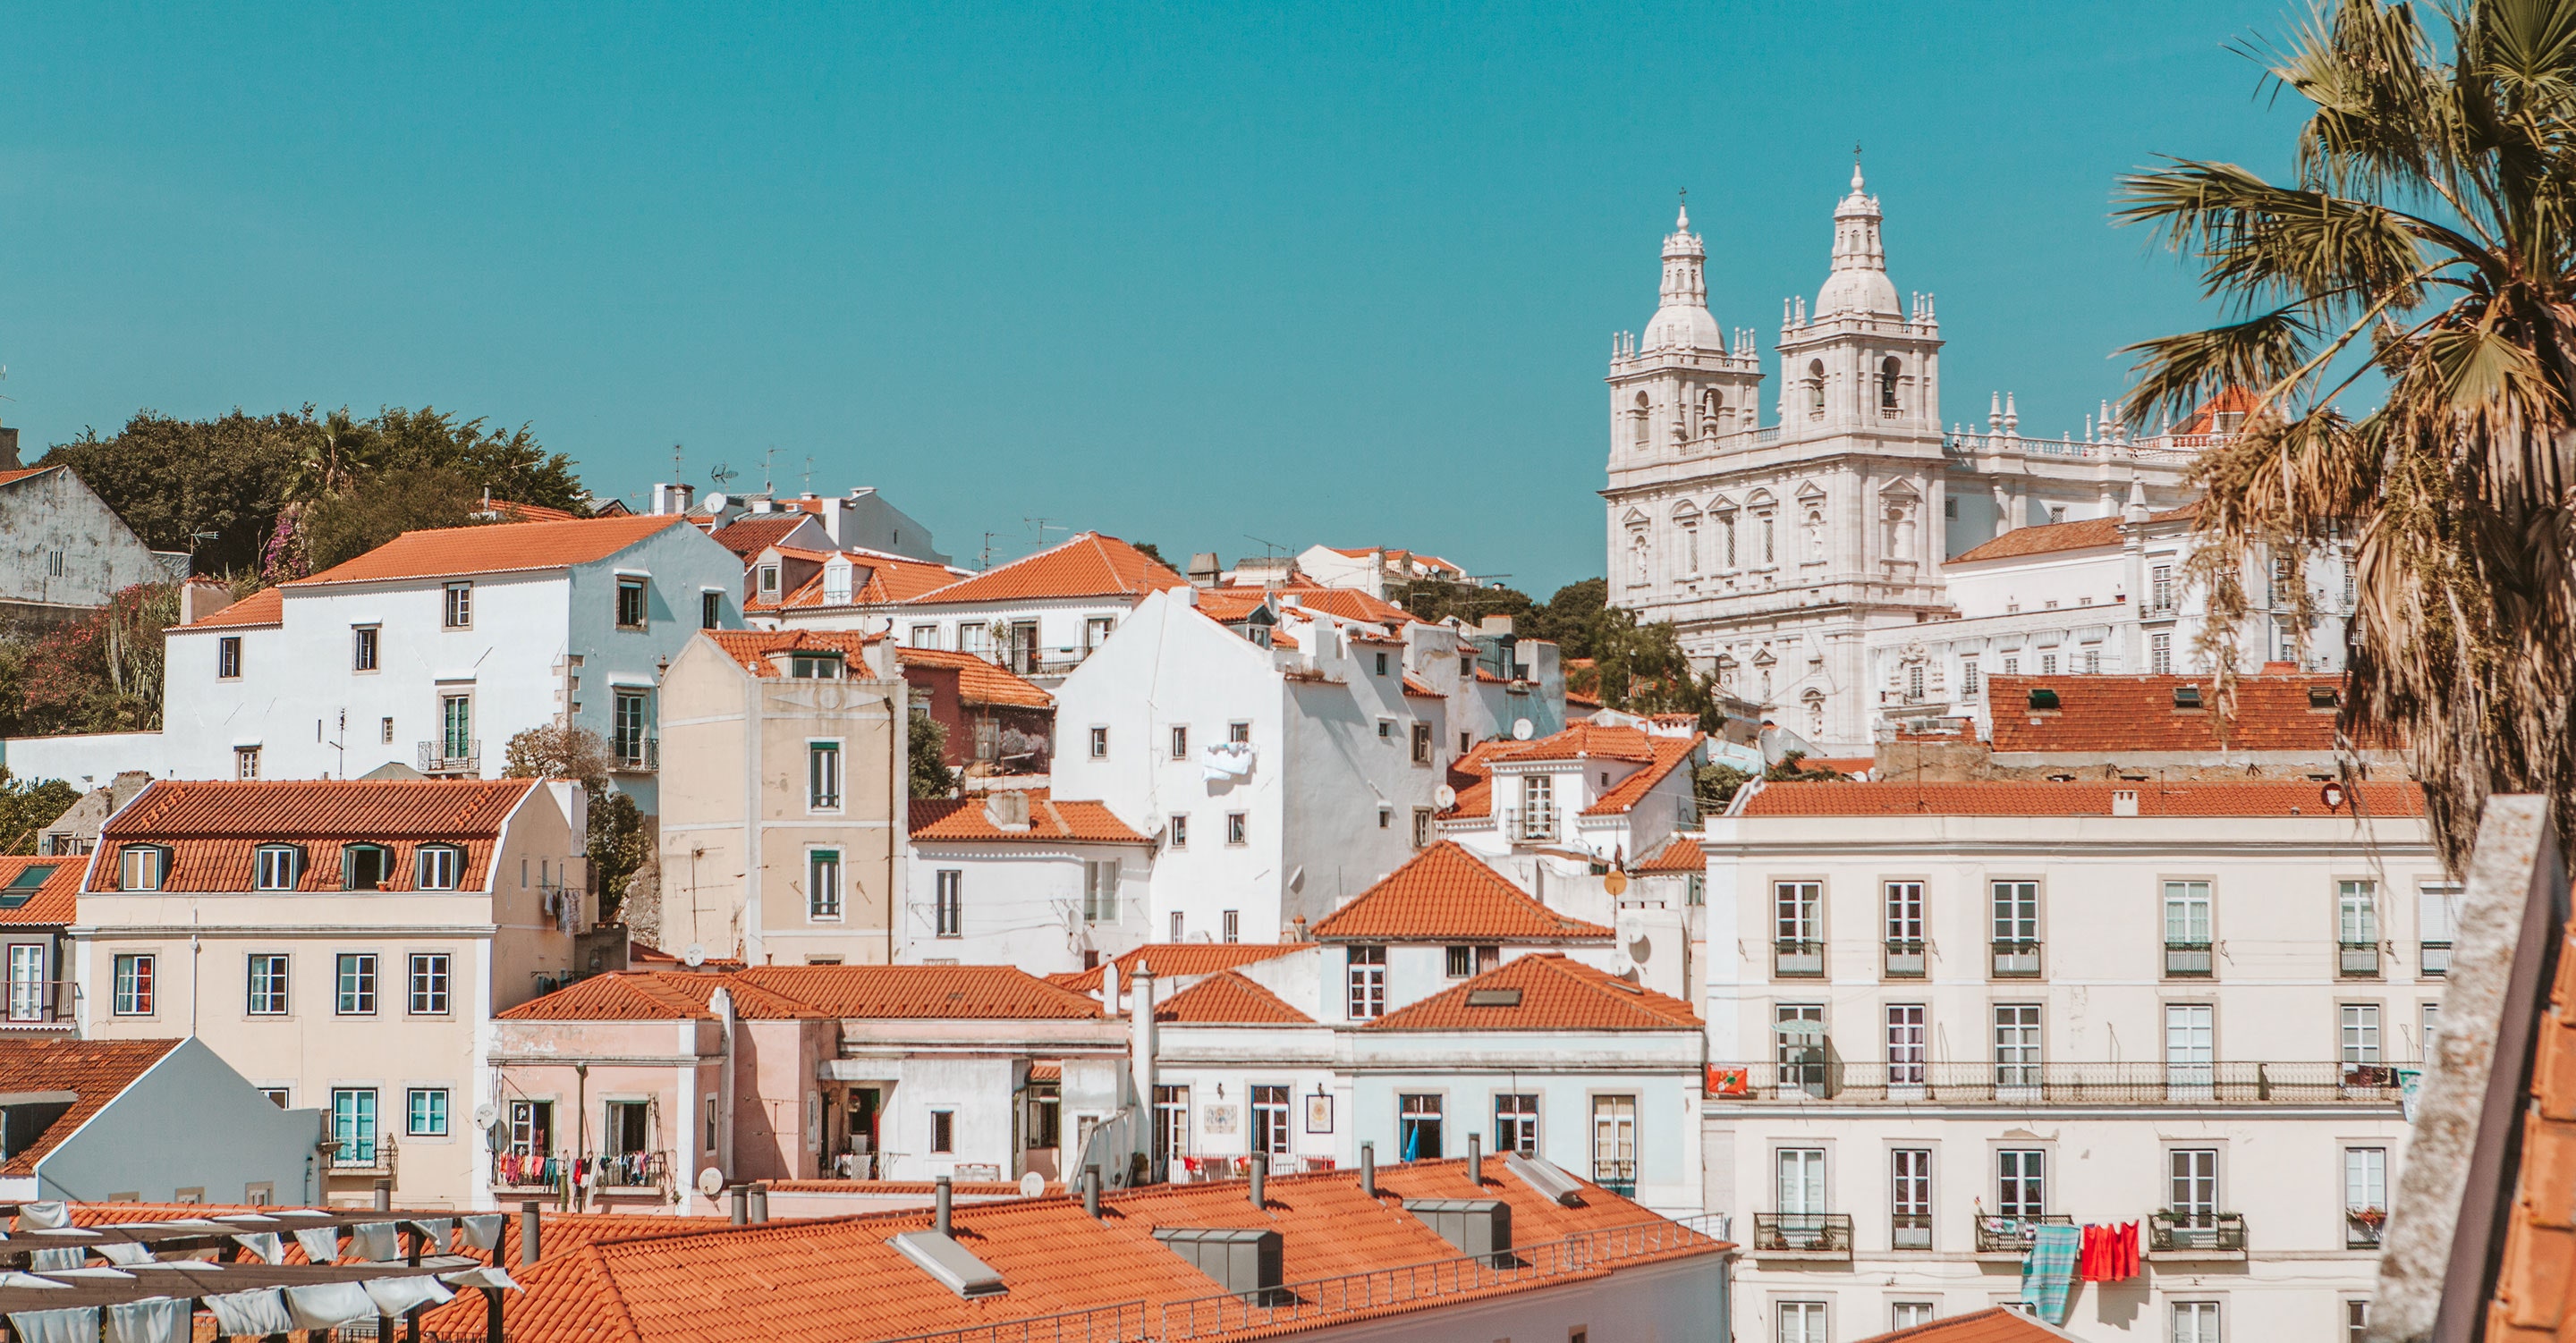 <p>Some of our favorite addresses are in Bairro Alto, a charming and buzzing bohemian neighborhood with cobbled streets and vibrantly colored houses. This is the ideal area to stay and soak up the city's foodie and nightlife scene. We love <a href="https://cna.st/affiliate-link/5562jUBkjoEKArhzrbgC62GDyQqQ2hWgRB2cRmcNaRdd2si9Y7MuUne2GffZey6uMFyLfy2Taza1HVjHWBNhTxYoAZmVHu5BPVC3gn14r71nbiQpEBppCqL97V67LuKoA3fSY8CUkytD17eFazuNfkKf9pcmXHkkLuKaPgA4TbpuNqbY6V4nJo23g2jAsMc8ajv711Hc3" rel="sponsored">The Ivens</a>, smack bang amongst the thick of it while managing to feel like a hidden oasis. Right nearby, <a href="https://cna.st/affiliate-link/gVLYTFHP77FHsgBtioDhjRxkW2AP5w35wuMEbfQ7g1HfV7zzR58pjpgKA4JrYLZfStqfQ4o6z7EaDb6wsWQYMjpsh2aFpHByPnUH9YY1aC4uHhQxYWfd8EFZr1UkrkwgP4icKYYhBcYquEVjpuA5zPY58xhBRN6pcv45YVsWUs7NAAsr4rTrbjugXnsHKsrG95X7rMVVX5dfSBdh6F" rel="sponsored">The Bairro Alto Hotel</a> is beloved for its outdoor dining restaurant BAHR—one of the <a href="https://www.cntraveler.com/gallery/best-restaurants-in-lisbon?mbid=synd_msn_rss&utm_source=msn&utm_medium=syndication">best restaurants in Lisbon</a>. Another great area is Alfama, one of Lisbon's oldest neighborhoods, where winding lanes are flanked by beautifully tiled palaces and dotted with shady squares lined with fragrant orange trees. It's also where you'll find hotels <a href="https://cna.st/affiliate-link/2NJLiQHiePnjC5nkKMKAAJ5FWh9UGLWASuEhh78R4vianV2qAUWmqzkF9C9DeYTQ8W5HcNoqYsSG4GMaqcM71sRNeEAjV8GLq6NgGZm1BwQmuLBQ7GbqnnFWqtC1RX9nHc5FdQyouAiE1rBHsCJAibEFa8CaipRdarx2BHFxLnB5RVcv7QHN8rNDoggqdHEdsmJrrwPVxi6s" rel="sponsored">Memmo Alfama</a> and <a href="https://cna.st/affiliate-link/NXK4oxtFZ3fpMunLK9TszMwvykajVi6XKZ5AMGHccbscFSqHgaHwTnLaZFsPRsrjj7wgUBhnZJ8BLhyFGrapht8Unm1aso6M8qpj8Xxo7uKpCwp8DibAuyziT1sumZmr5kHhMmAG2YT8YogxqbvVTNwZiqp5x3yUv3xaDiA7bWcpUXoNPqx282bTnemyk5VDF7JYQjfcqQVaMu7ZJoayJWkjNBnYCcXU3zf8X1zf" rel="sponsored">Santiago de Alfama</a>.</p> <p><strong>How we choose the best hotels in Lisbon</strong></p> <p>Every hotel on this list has been selected independently by our editors and reviewed by a <em>Condé Nast Traveler</em> journalist who knows the destination and has stayed at that property. When choosing hotels, our editors consider both luxury properties and boutique and lesser-known boltholes that offer an authentic and insider experience of a destination. We’re always looking for beautiful design, a great location, and warm service—as well as serious sustainability credentials. We update this list regularly as new hotels open and existing ones evolve.</p><p>Sign up to receive the latest news, expert tips, and inspiration on all things travel</p><a href="https://www.cntraveler.com/newsletter/the-daily?sourceCode=msnsend">Inspire Me</a>